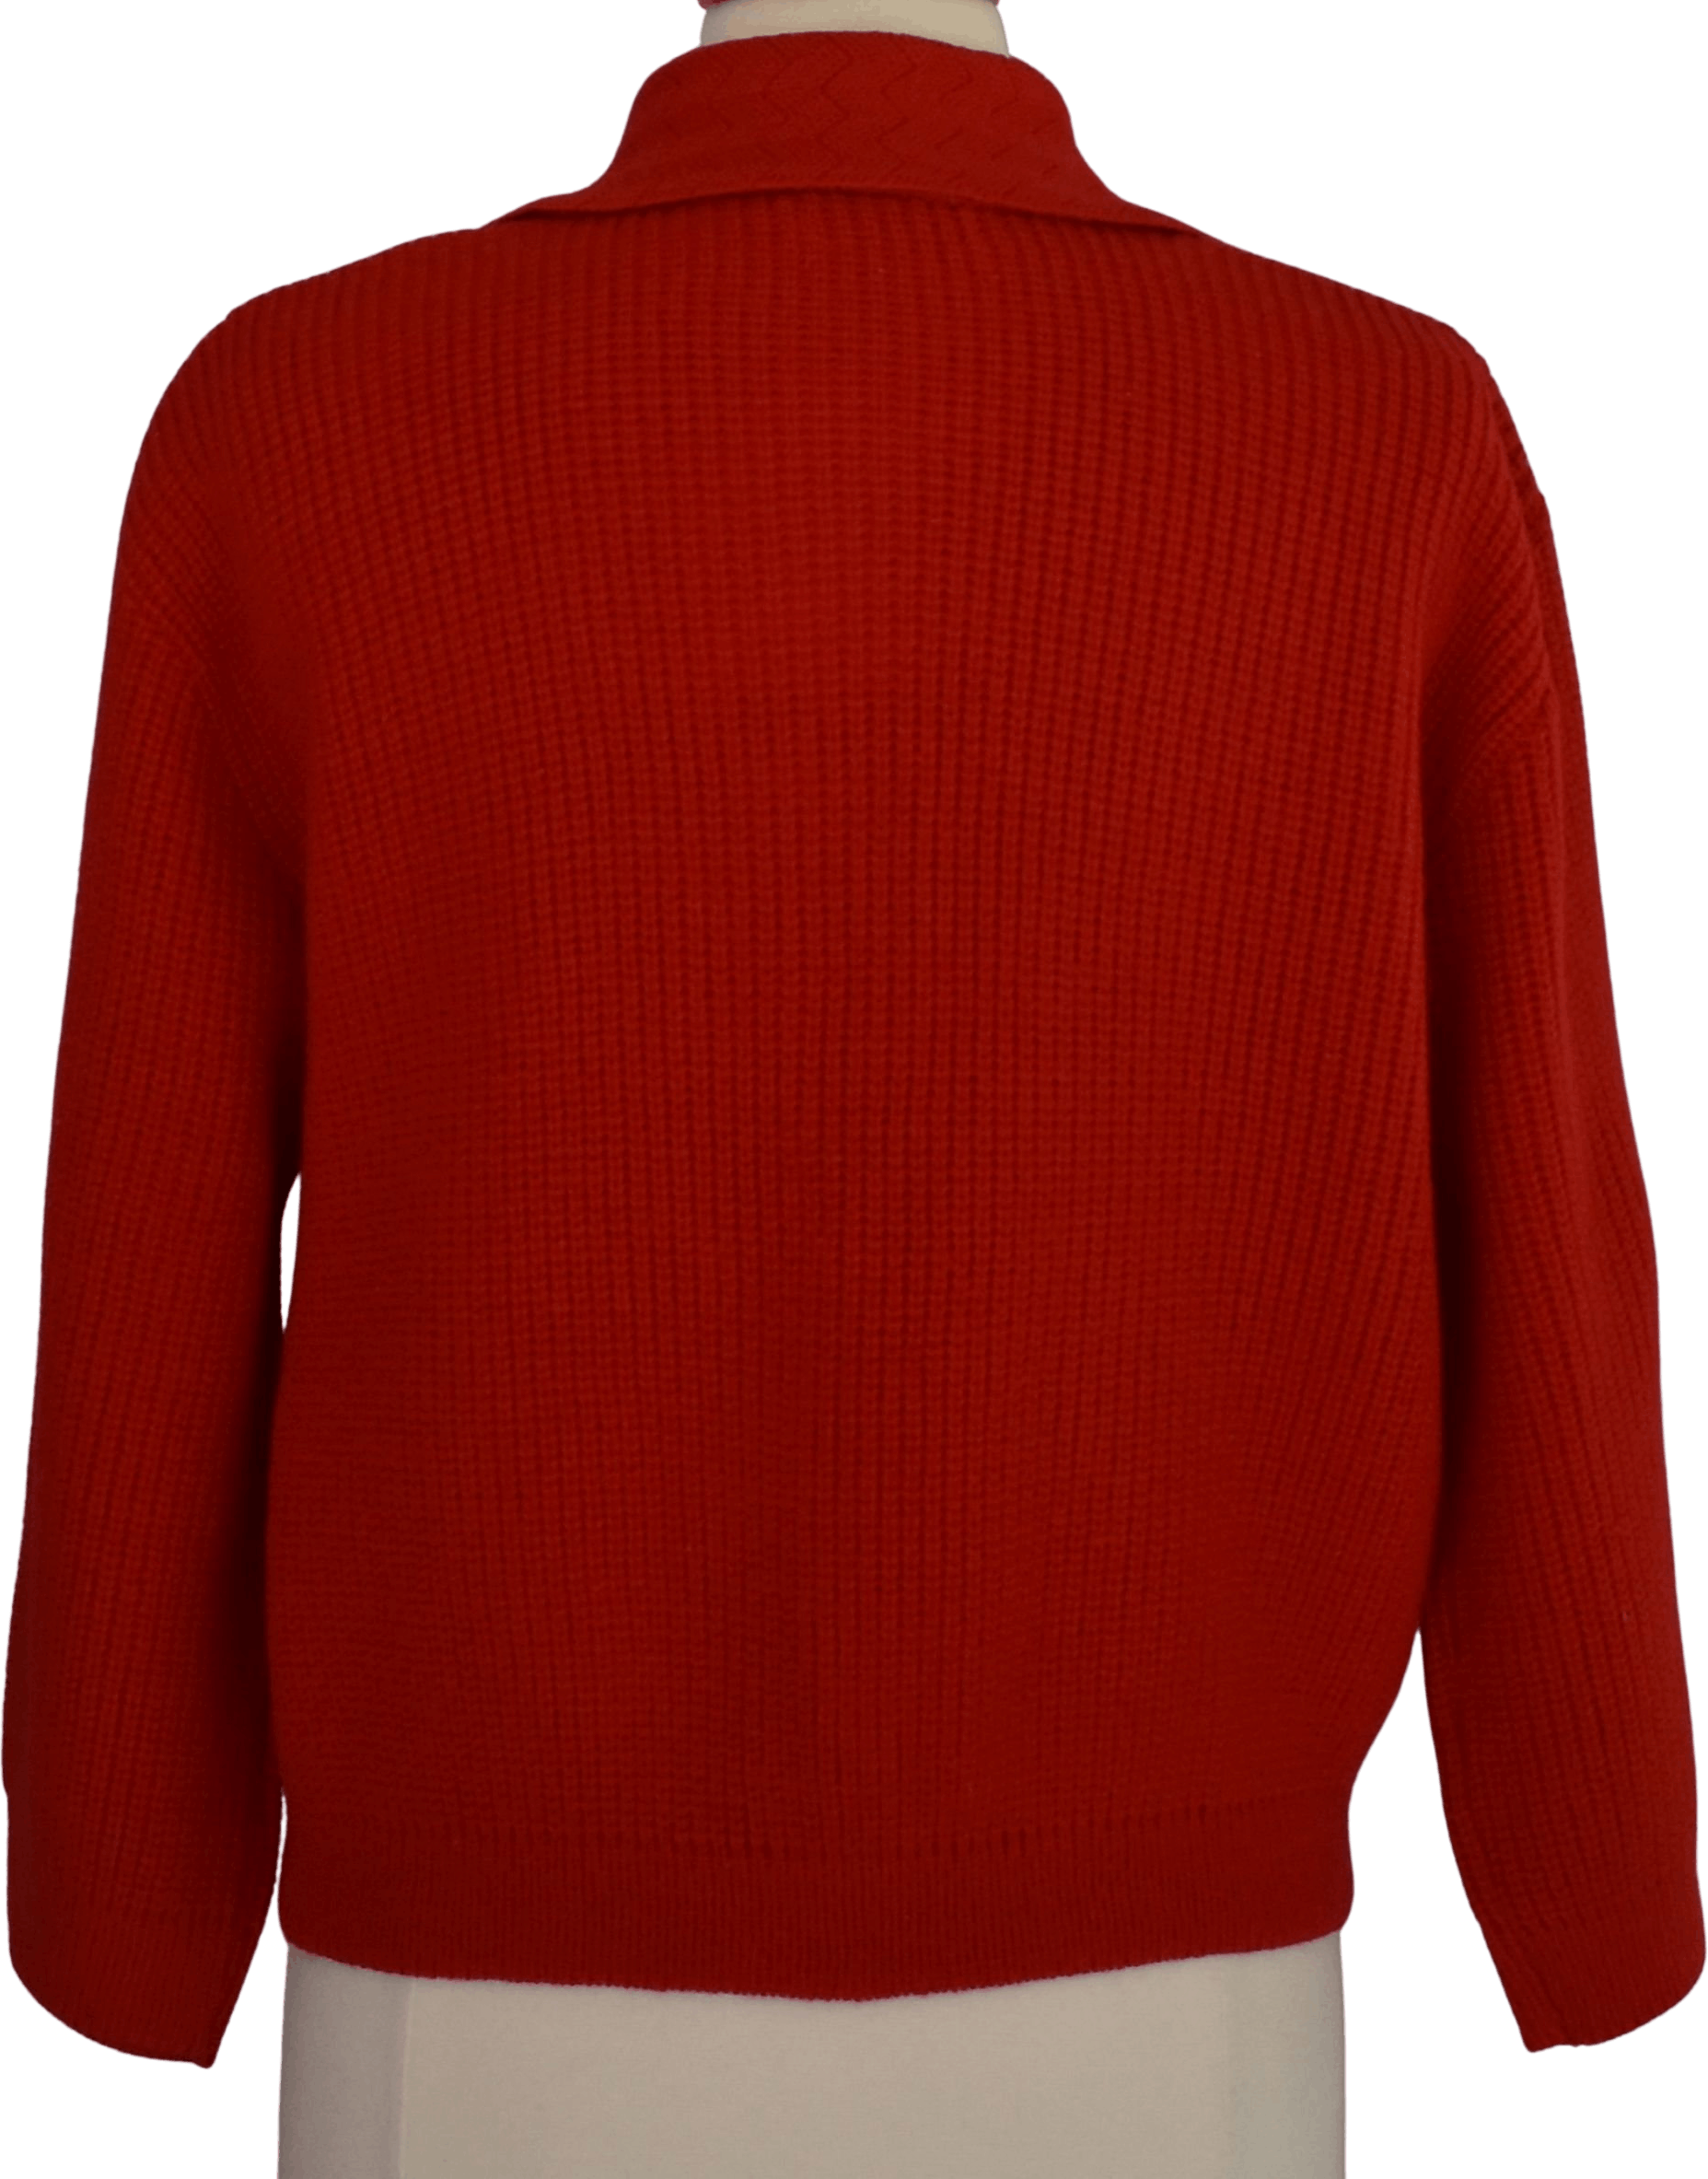 Vintage 50’s Red Wool Cardigan Ribbed Knit Sweater by A Brownie ...